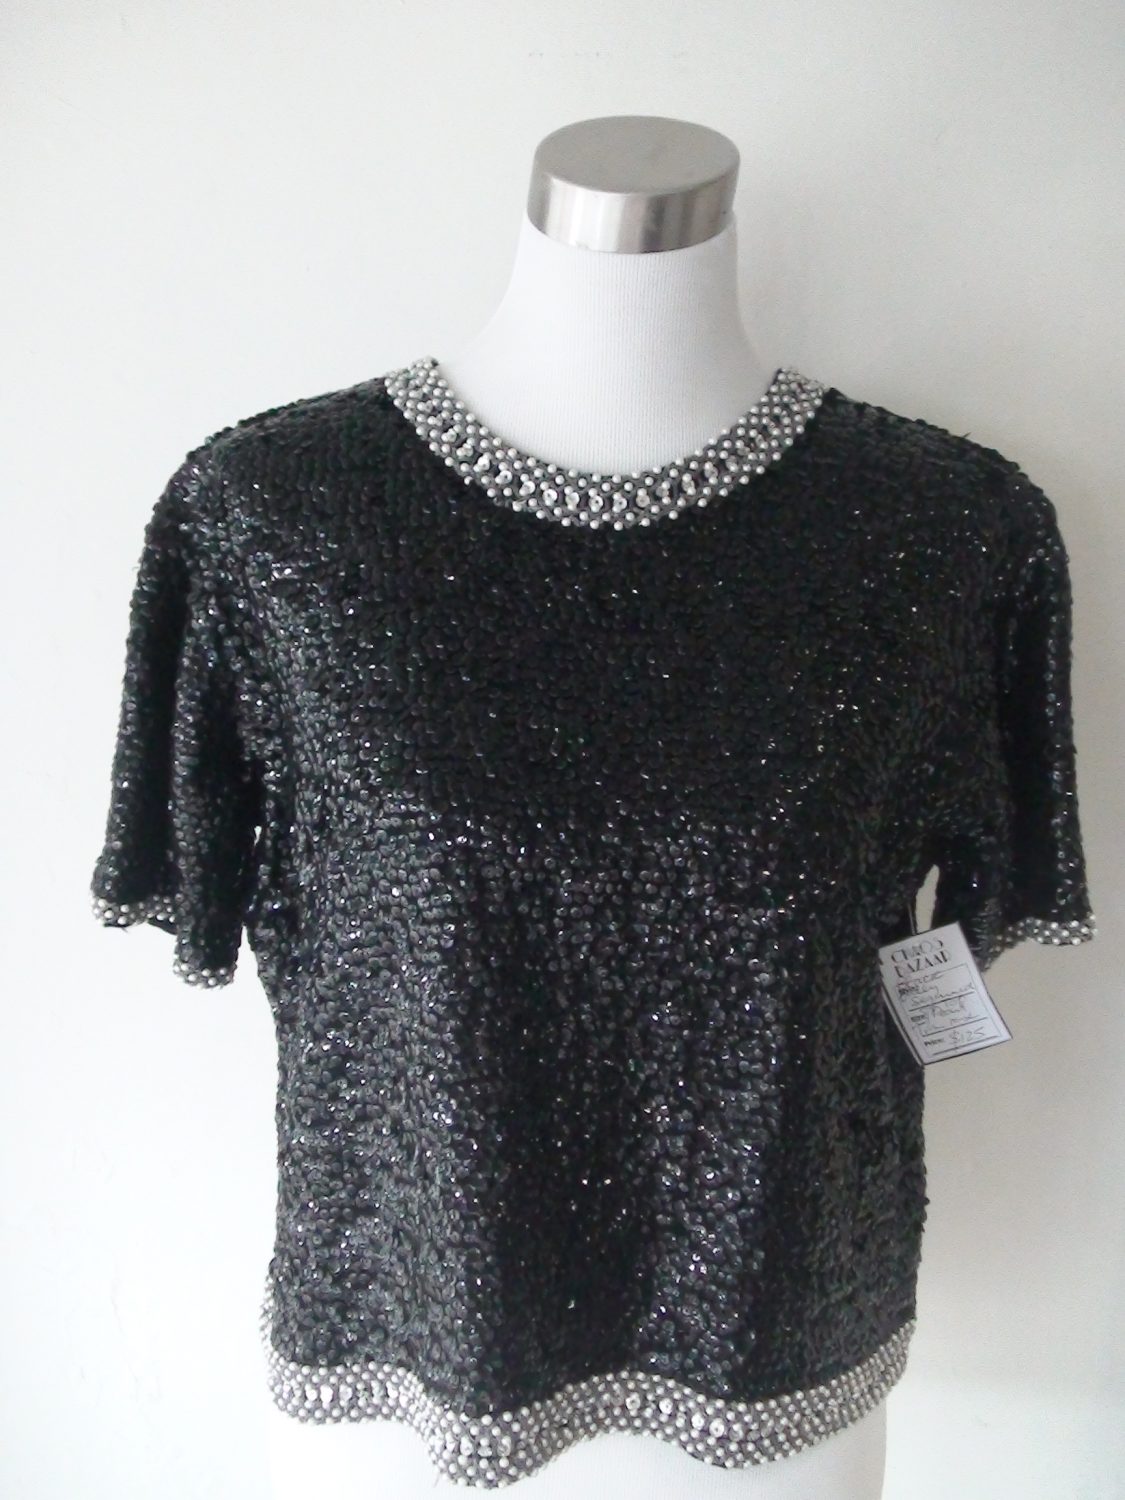 Classic 1960s Sequin and Pearl Beaded Black Top | Chaos Bazaar Vintage